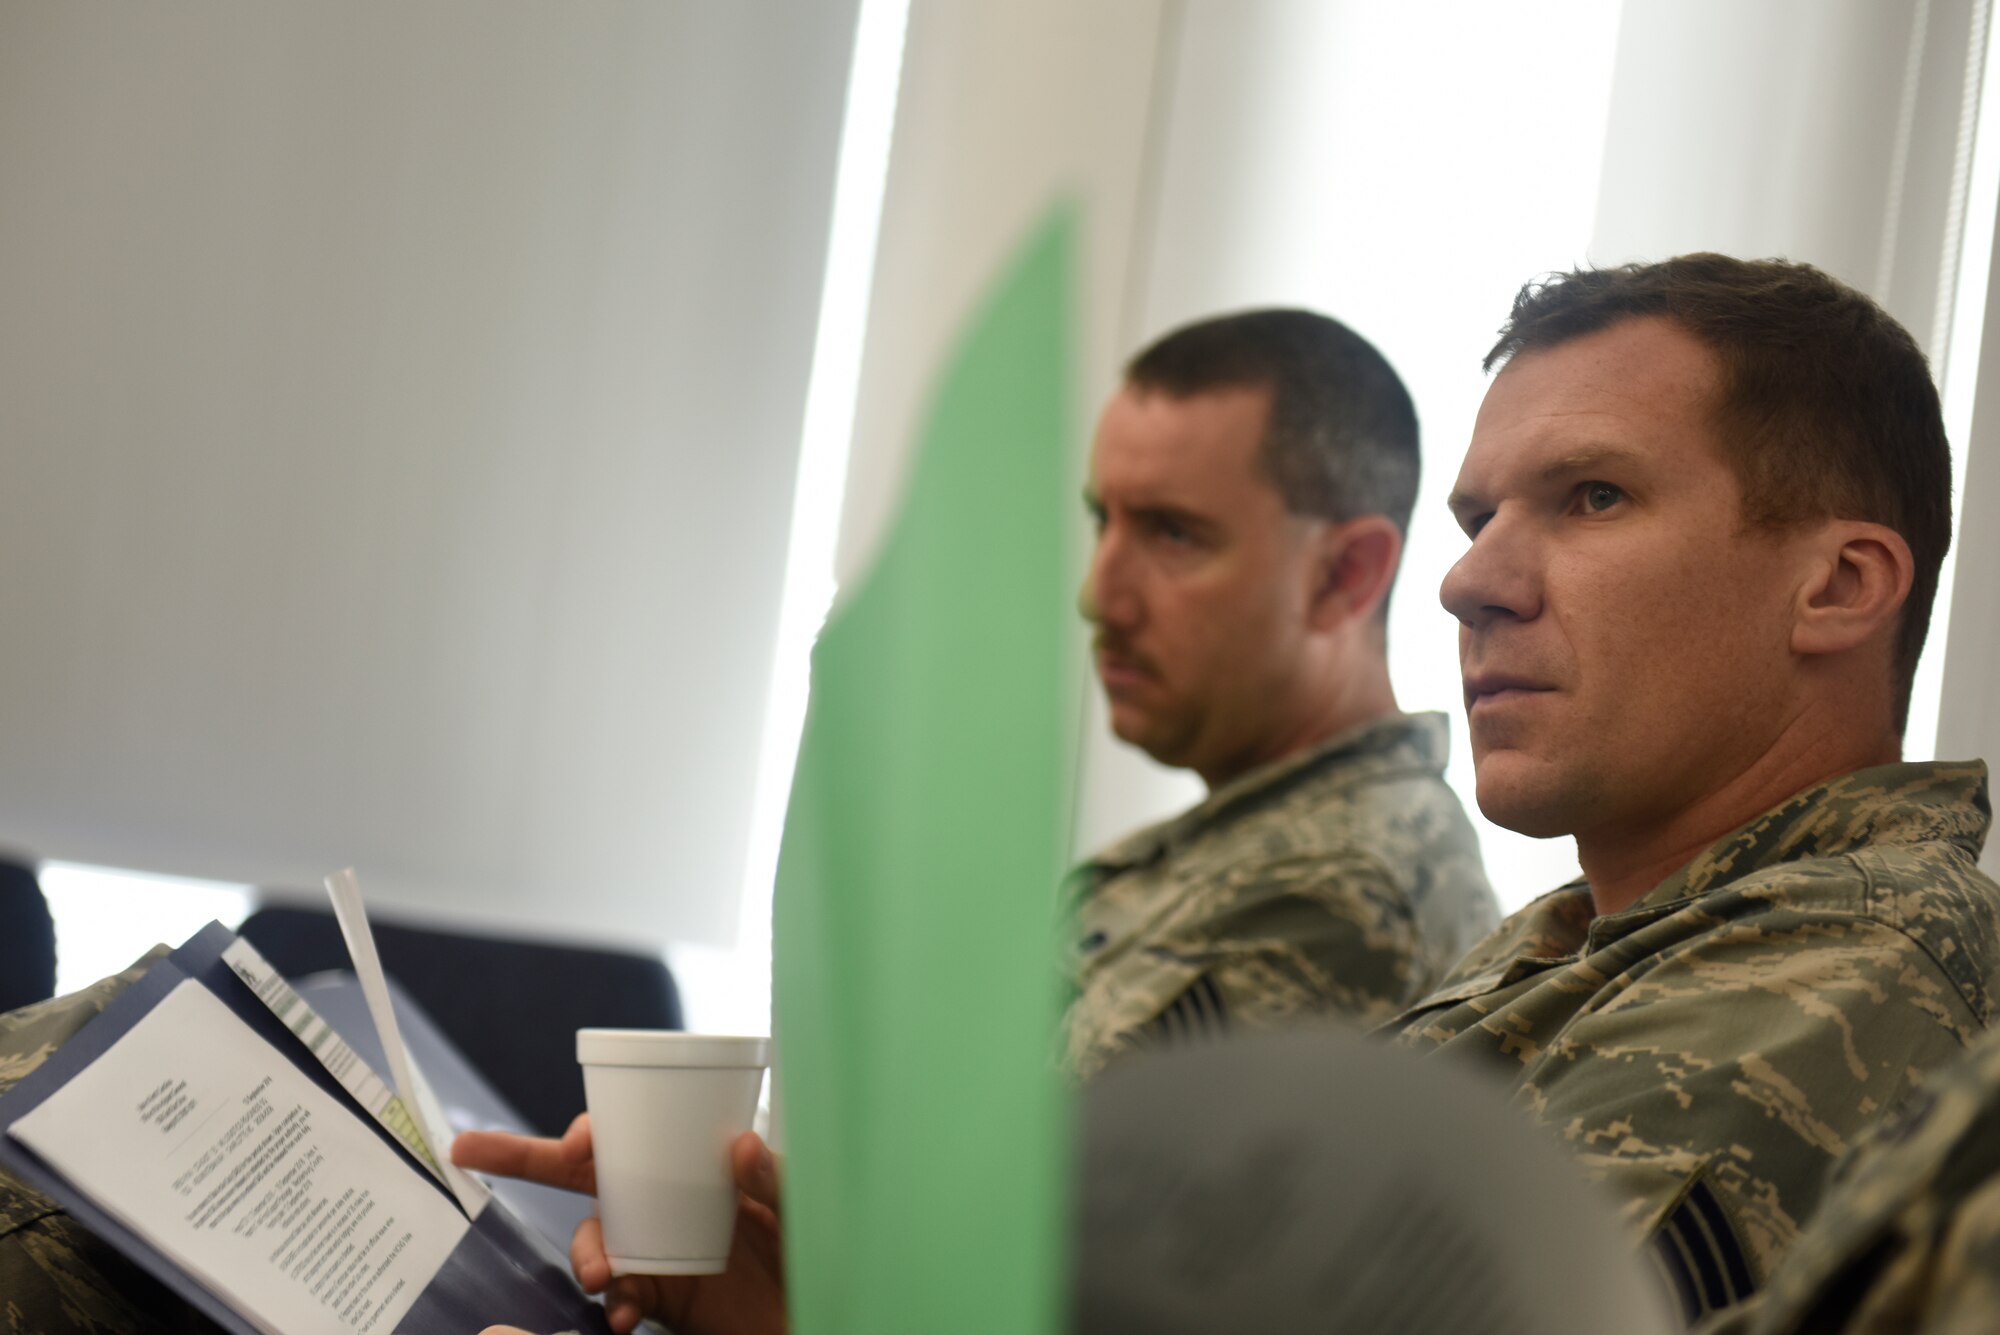 U.S. Air Force air transportation specialists with the 145th Logistics Readiness Squadron (LRS), listen as Senior Master Sgt. Gene Katz, operations and compliance superintendent with the 145th LRS, briefs personnel assigned to an 11-person team ready to assist in Hurricane Florence Relief efforts at the North Carolina (N.C.) Air National Guard Base, Charlotte Douglas International Airport, Sept.17, 2018.  The 11-person team will create and move pallets filled with supplies like food and water in a Kinston, N.C. airport.